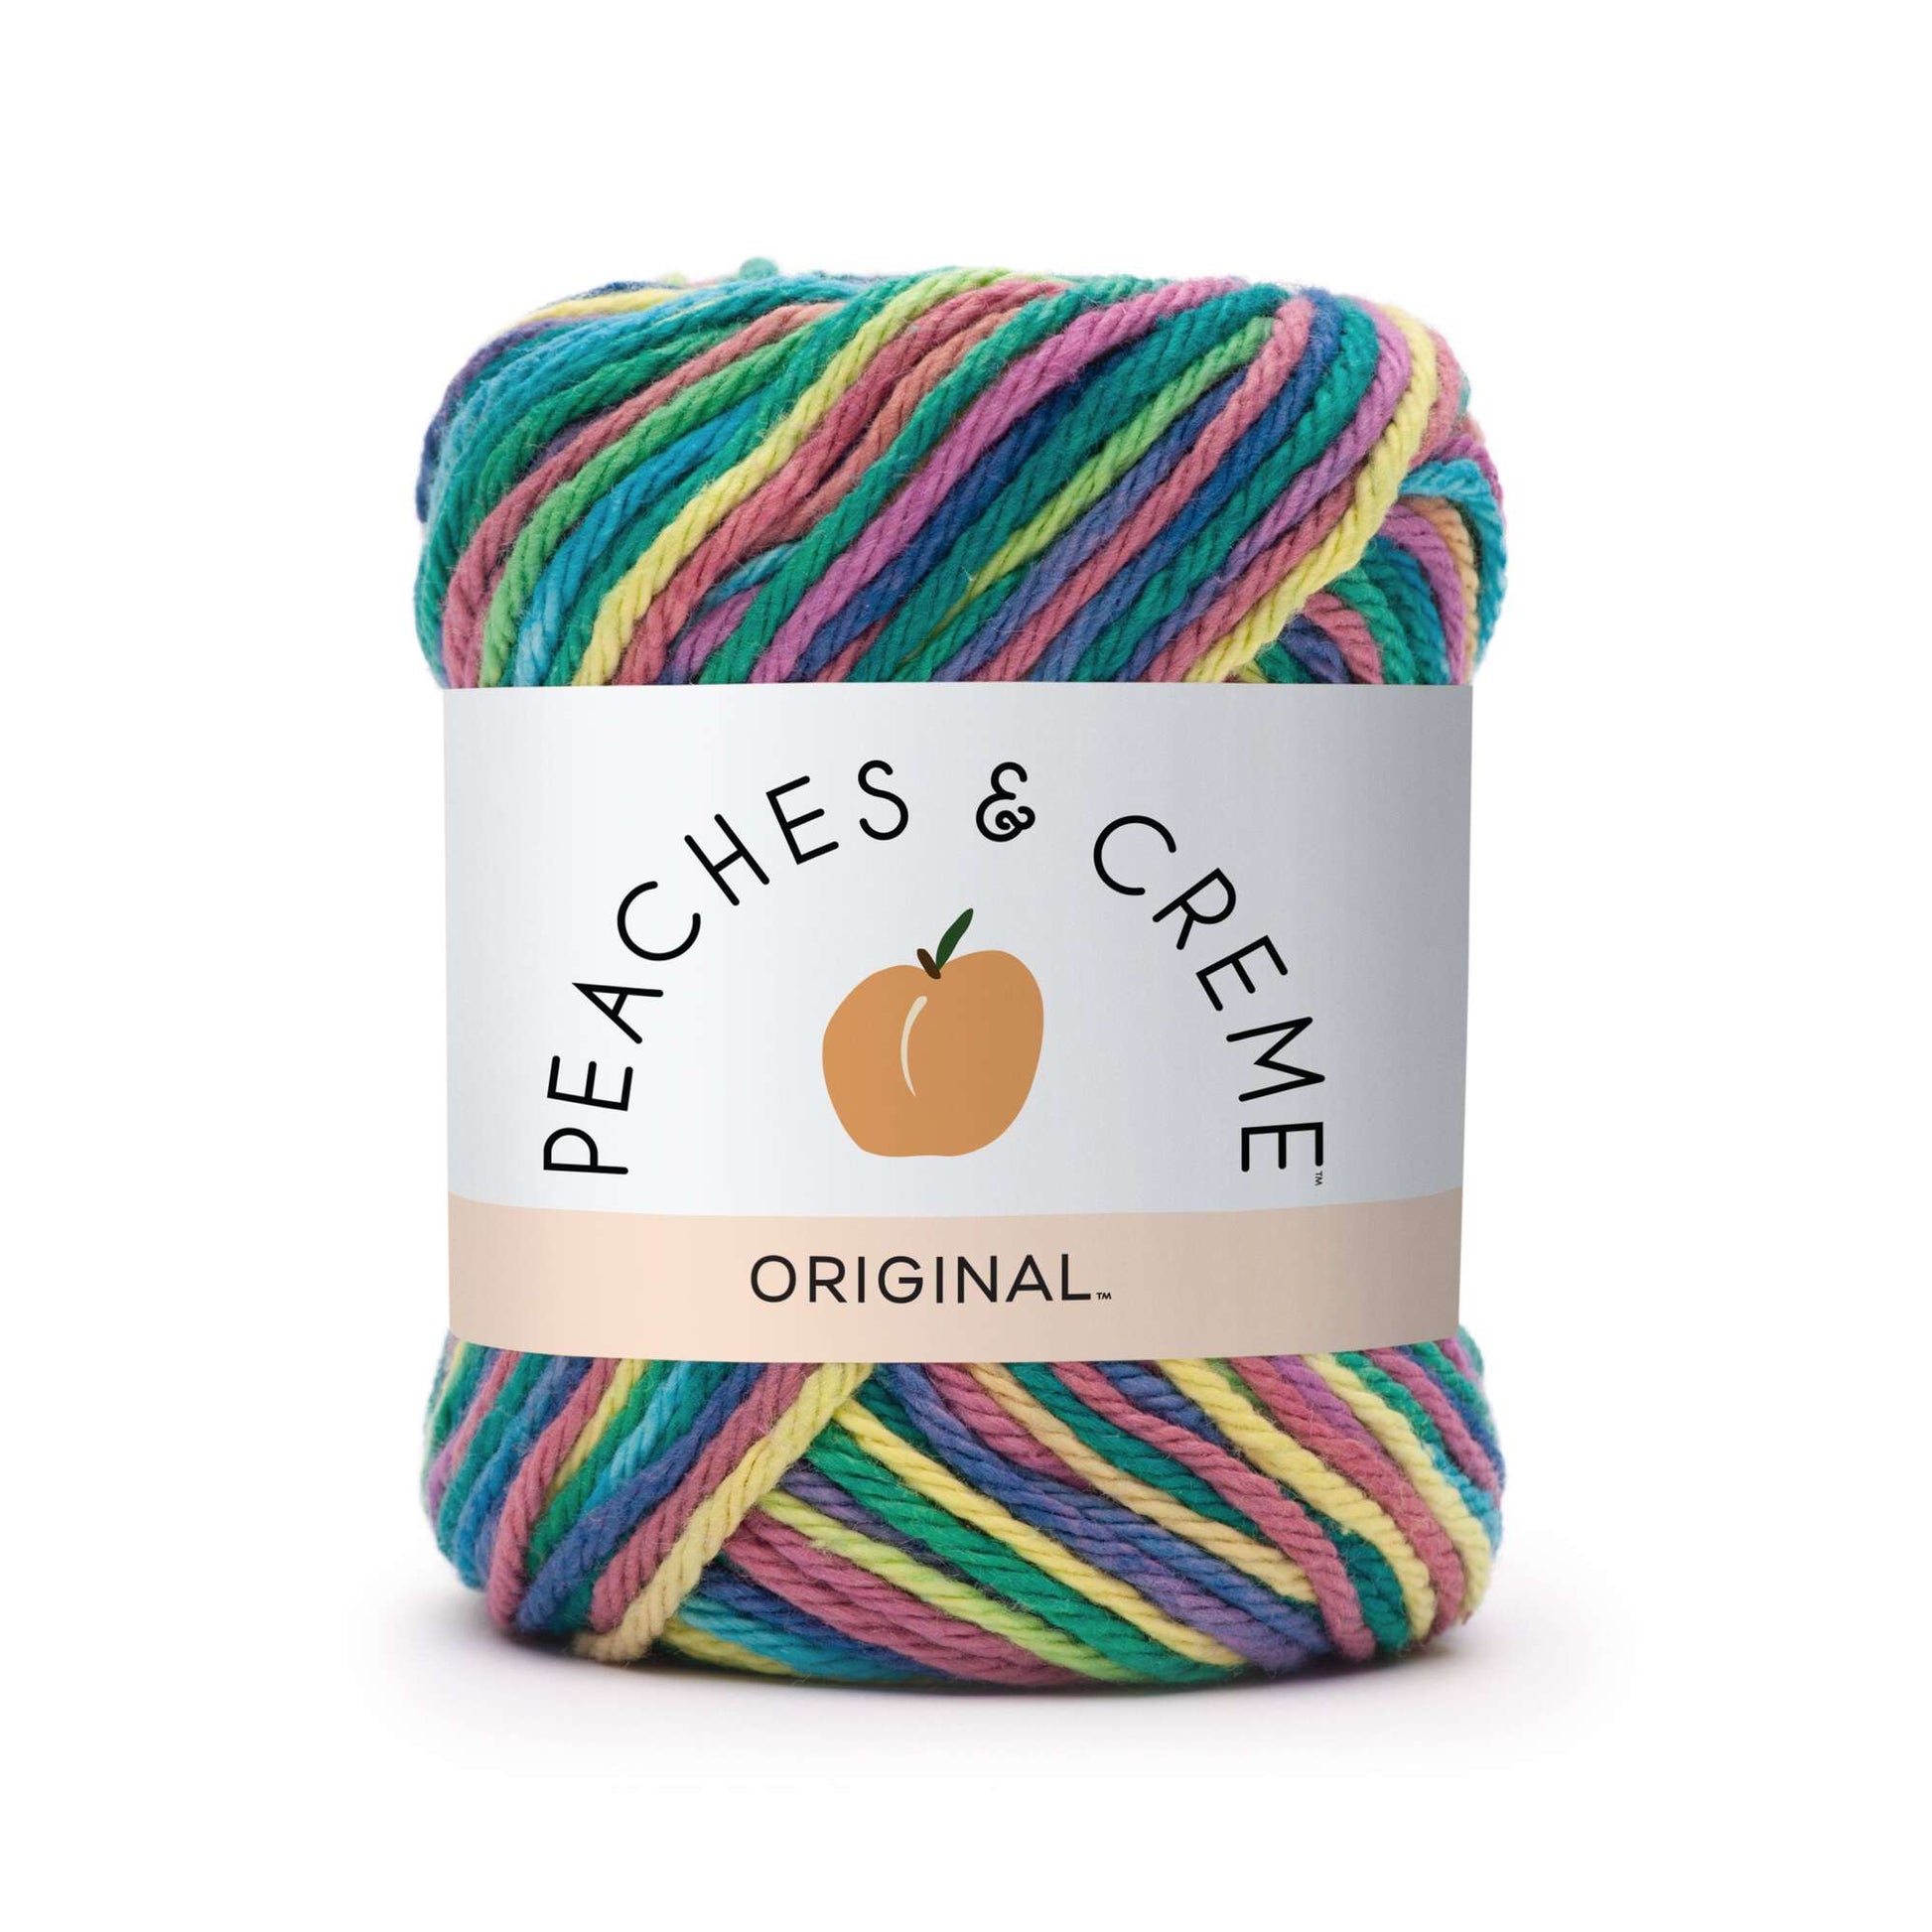 Peaches & Crème Ombres Yarn Psychedelic